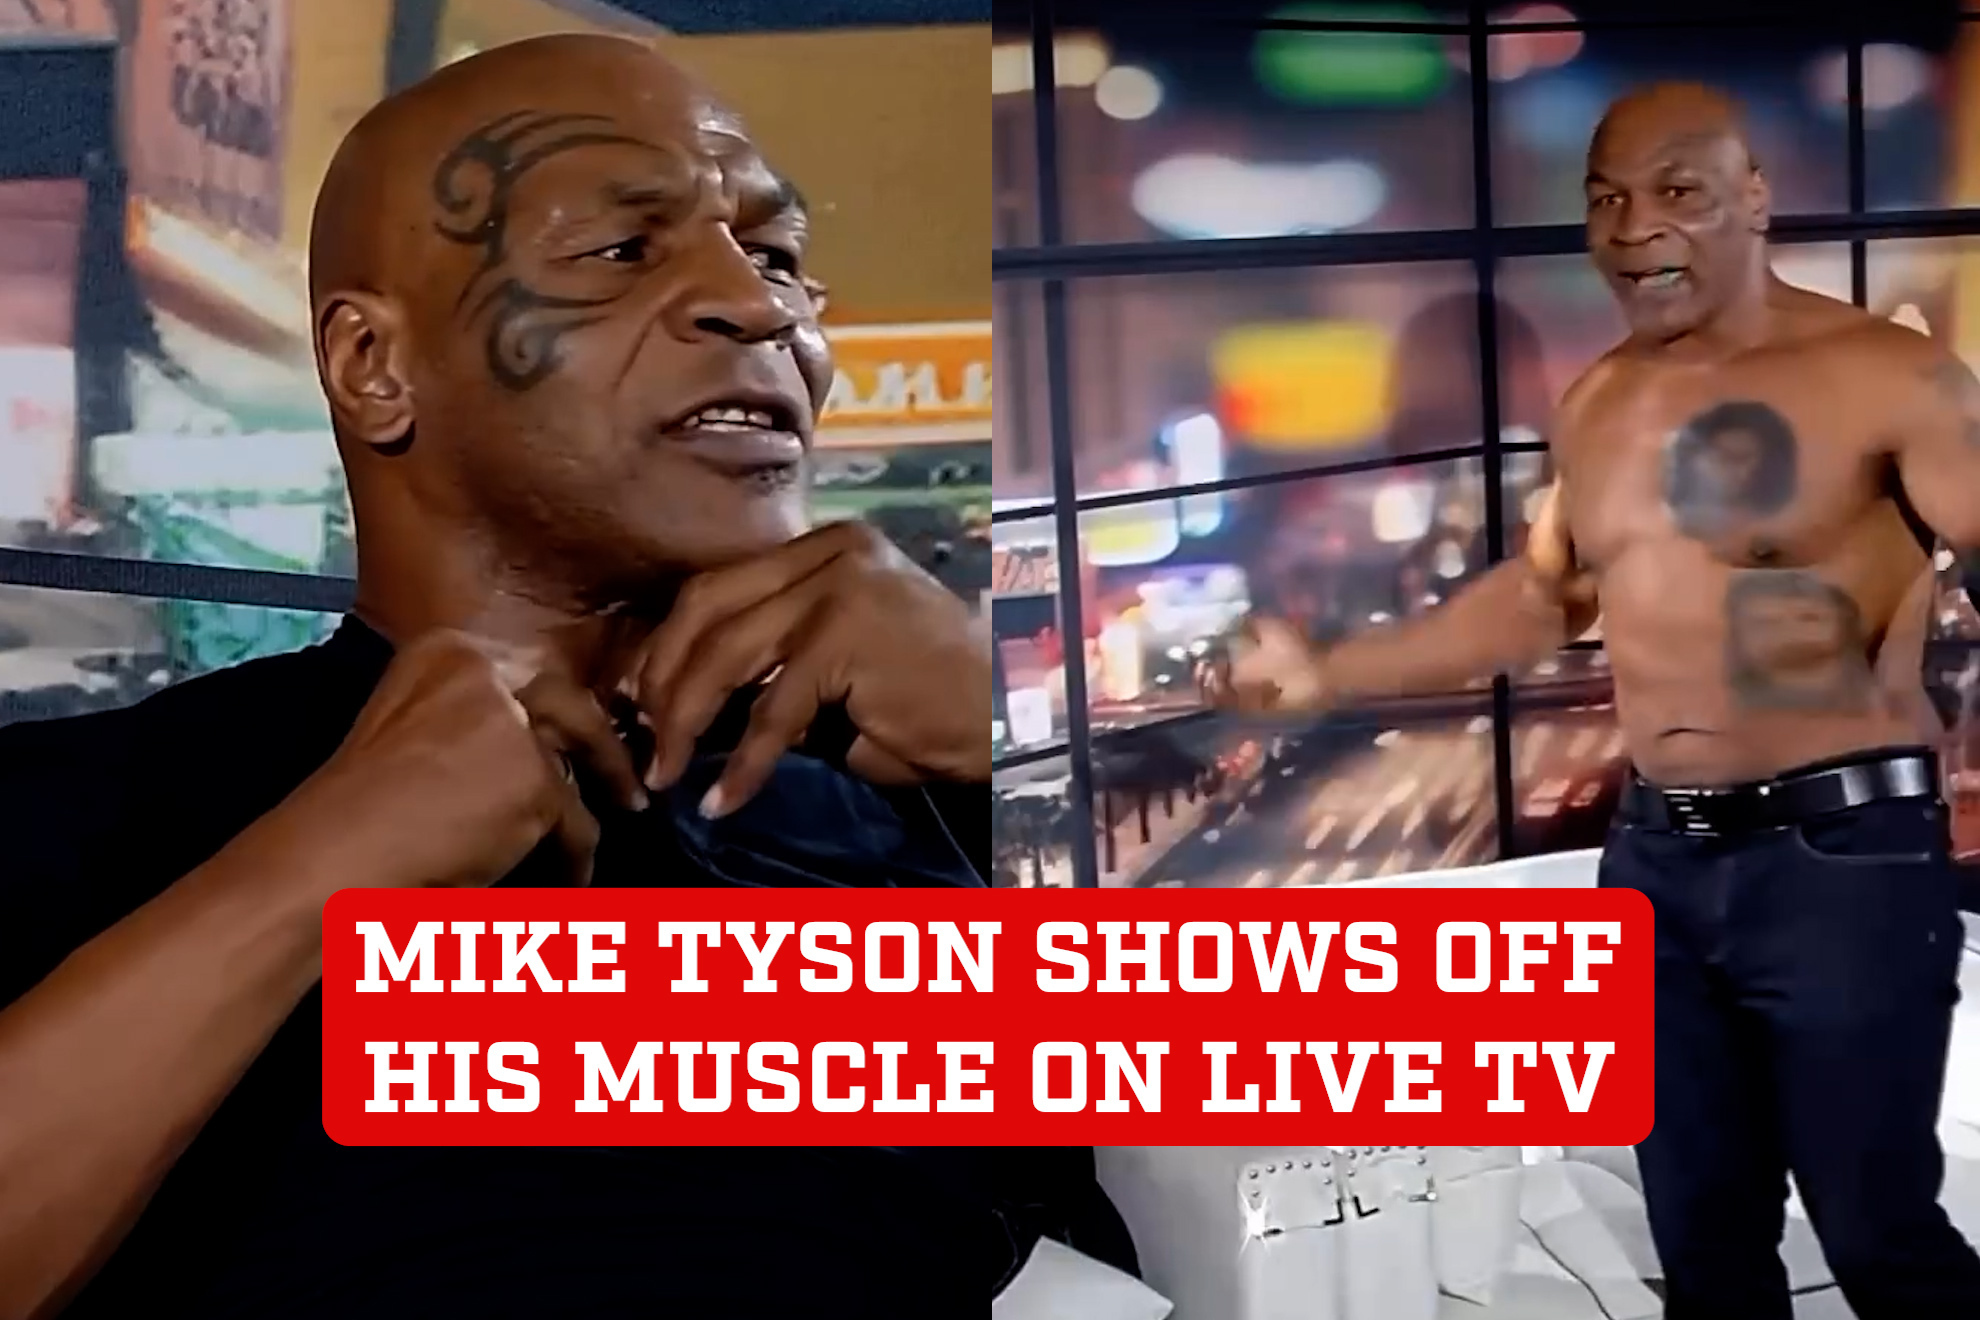 Mike Tyson goes topless and flexes his muscles as he calls out talk show host